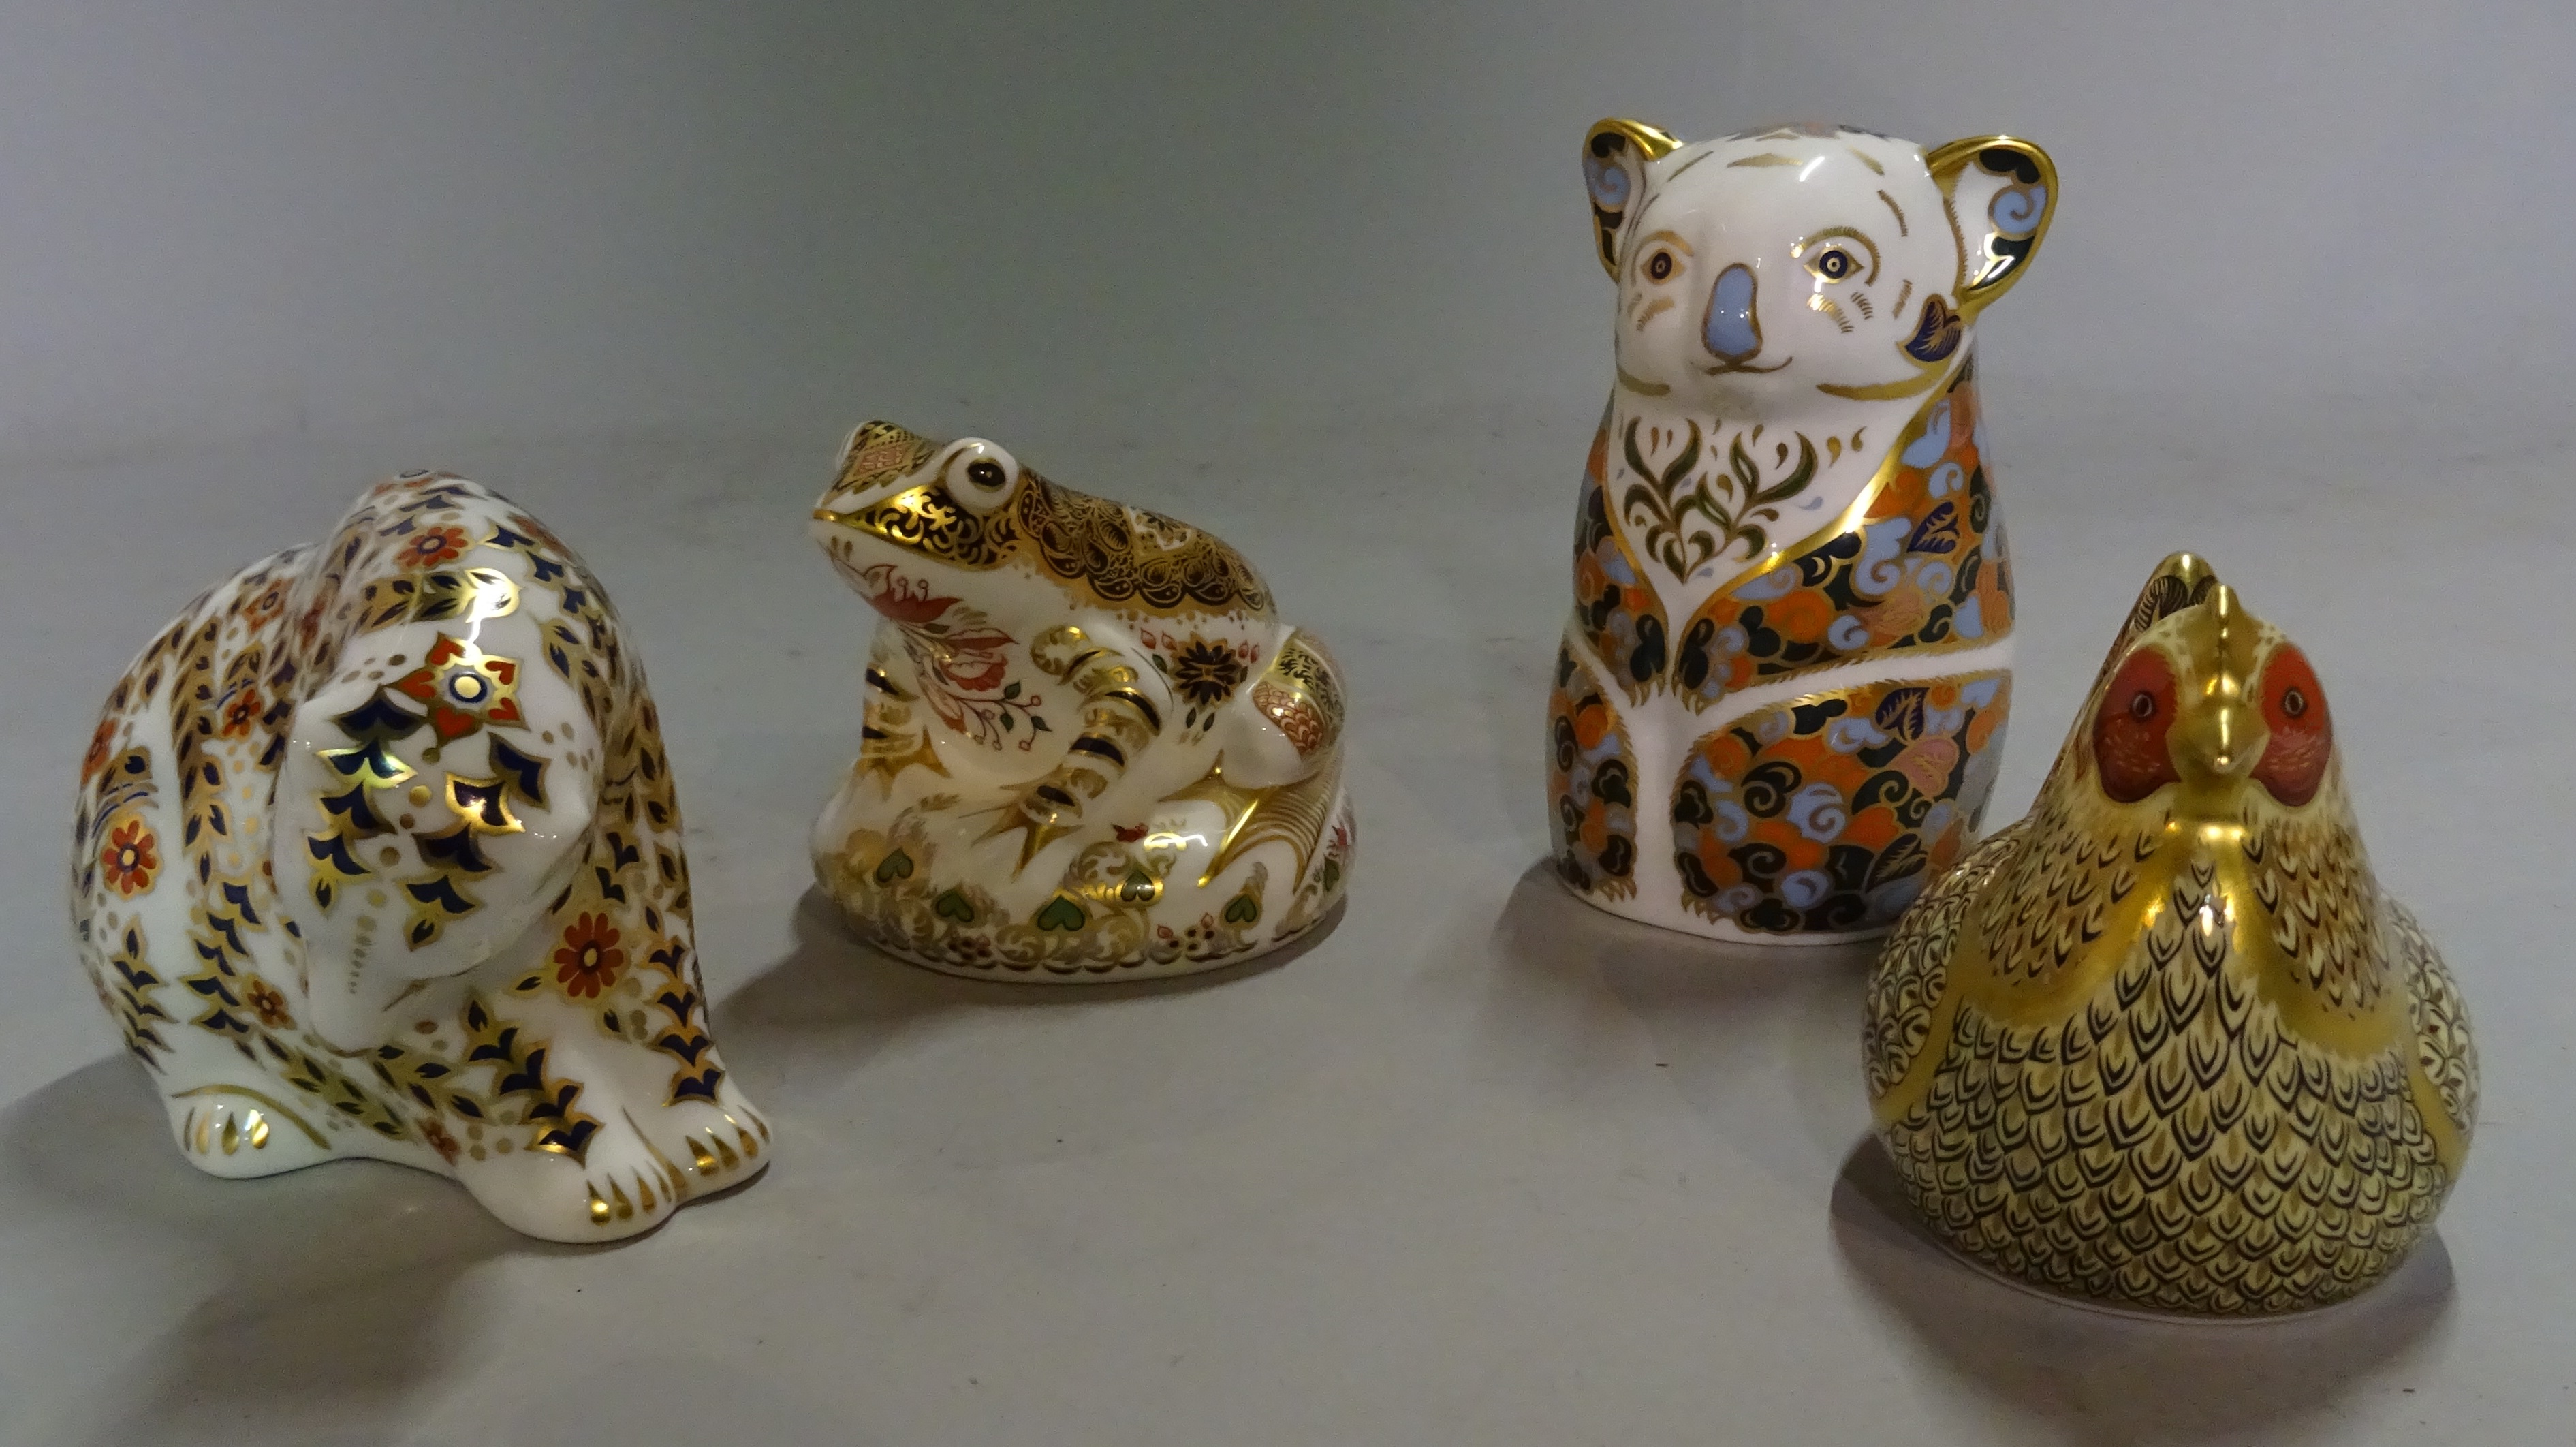 Four Royal Crown Derby Imari paperweights modelled as animals, comprising; a chicken, a koala, a bear and a frog.